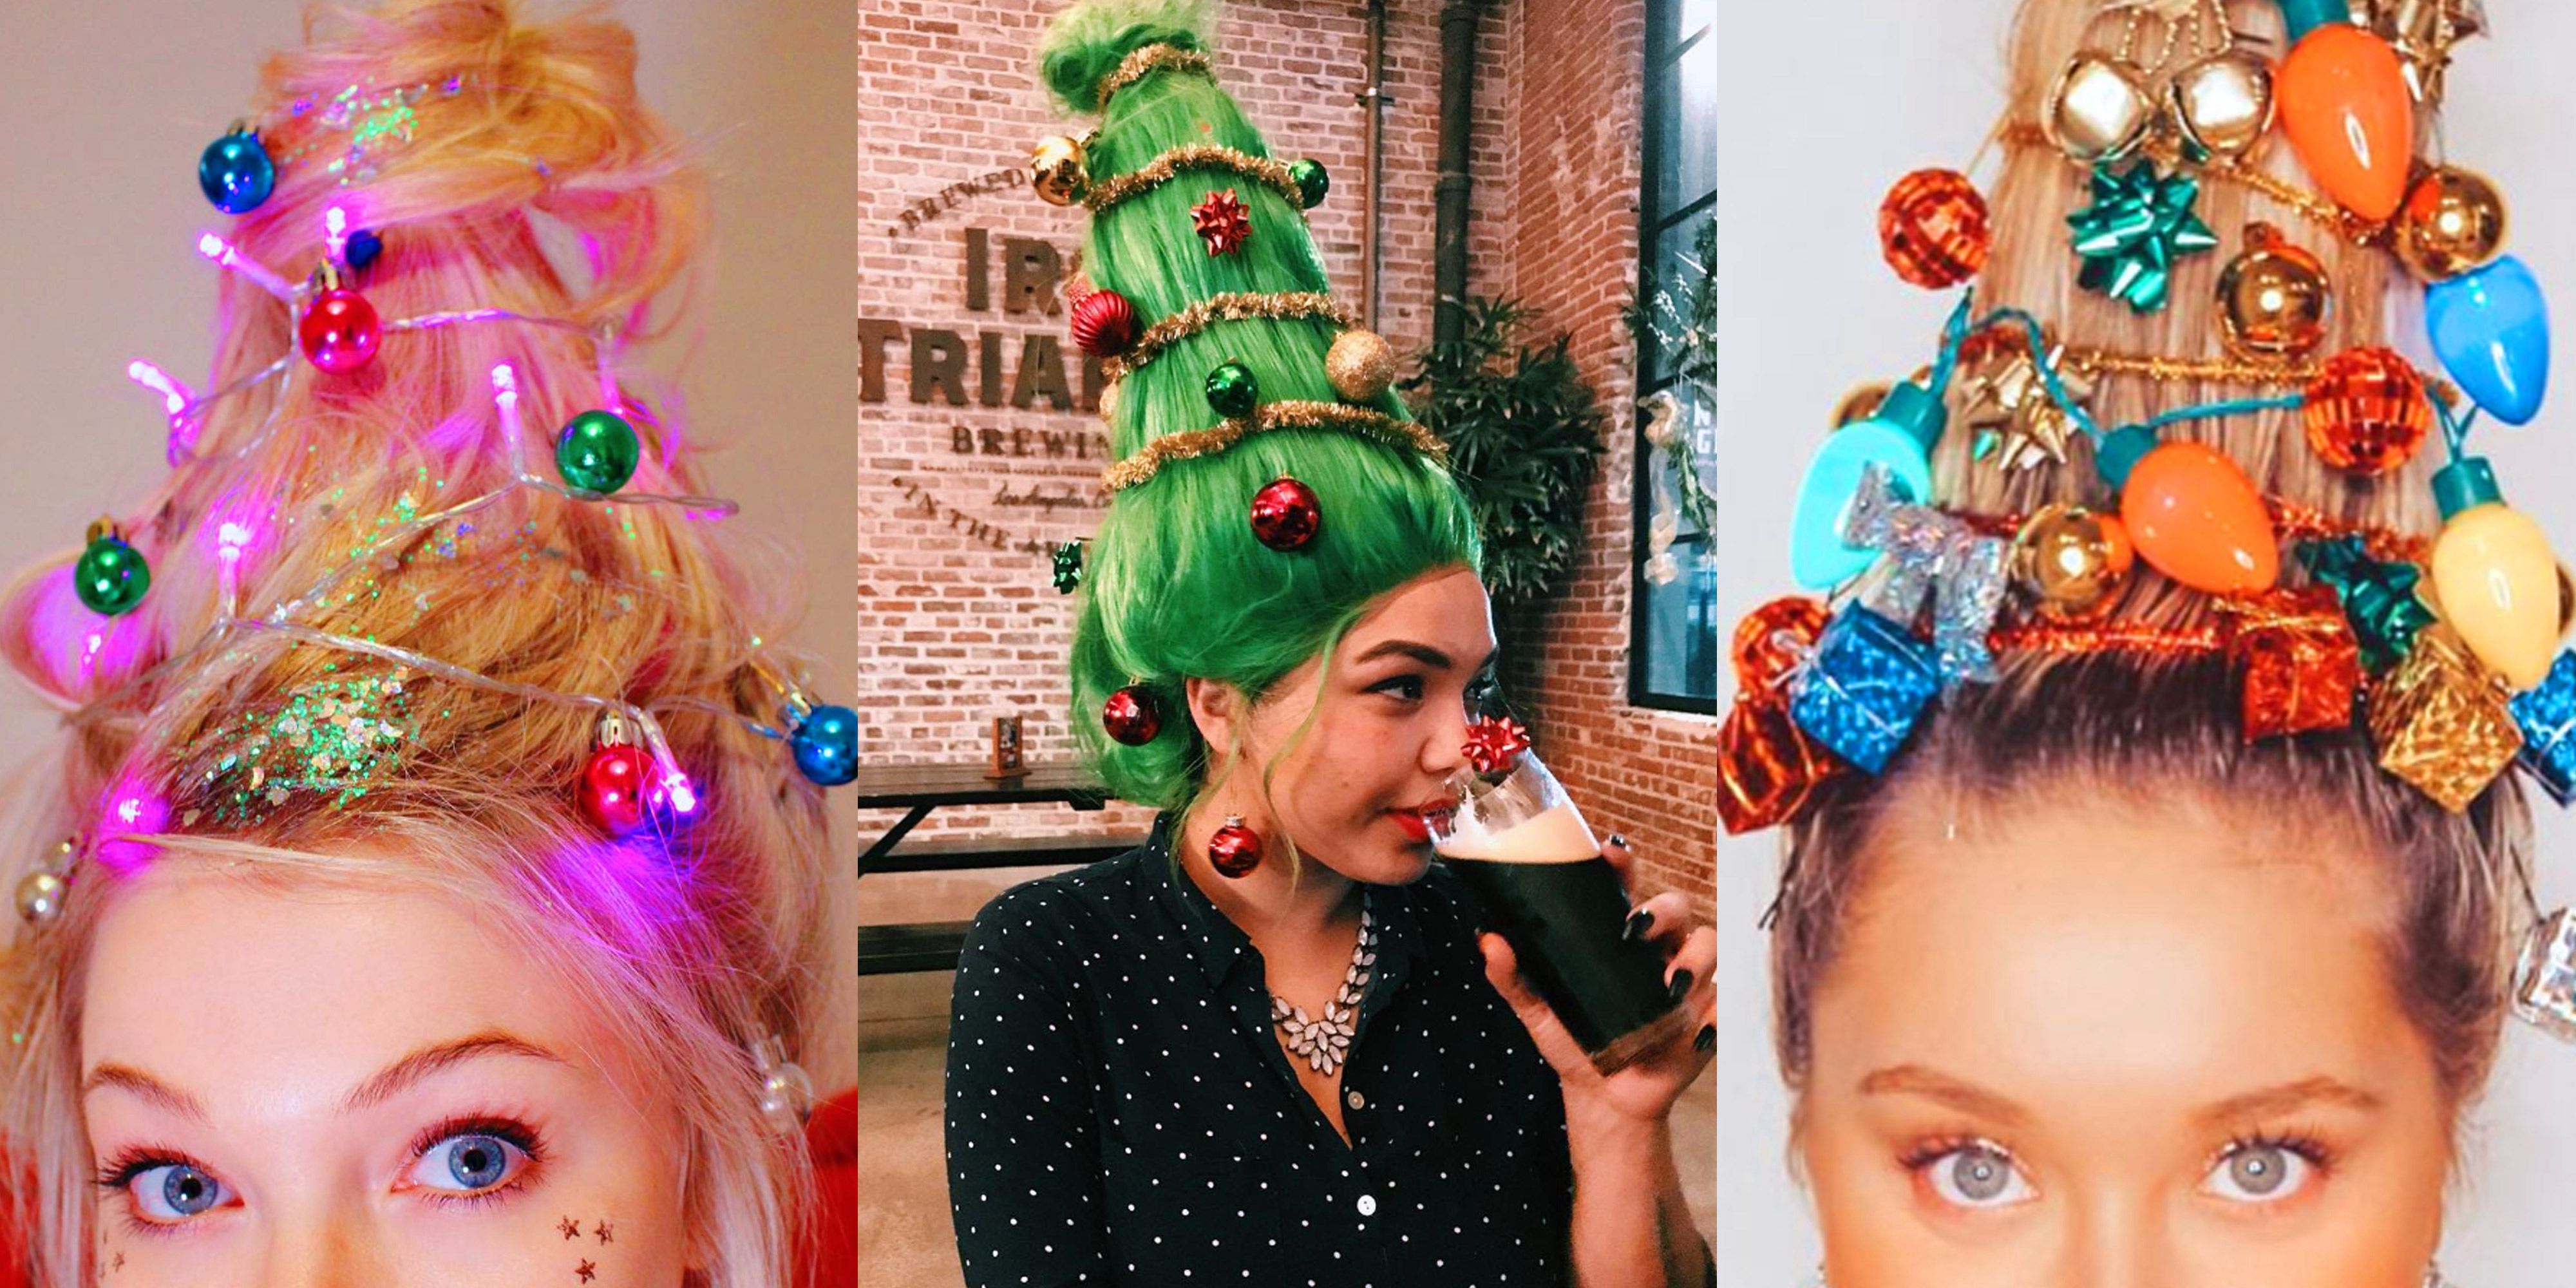 The Christmas Tree Hair Trend Is Taking Over Instagram